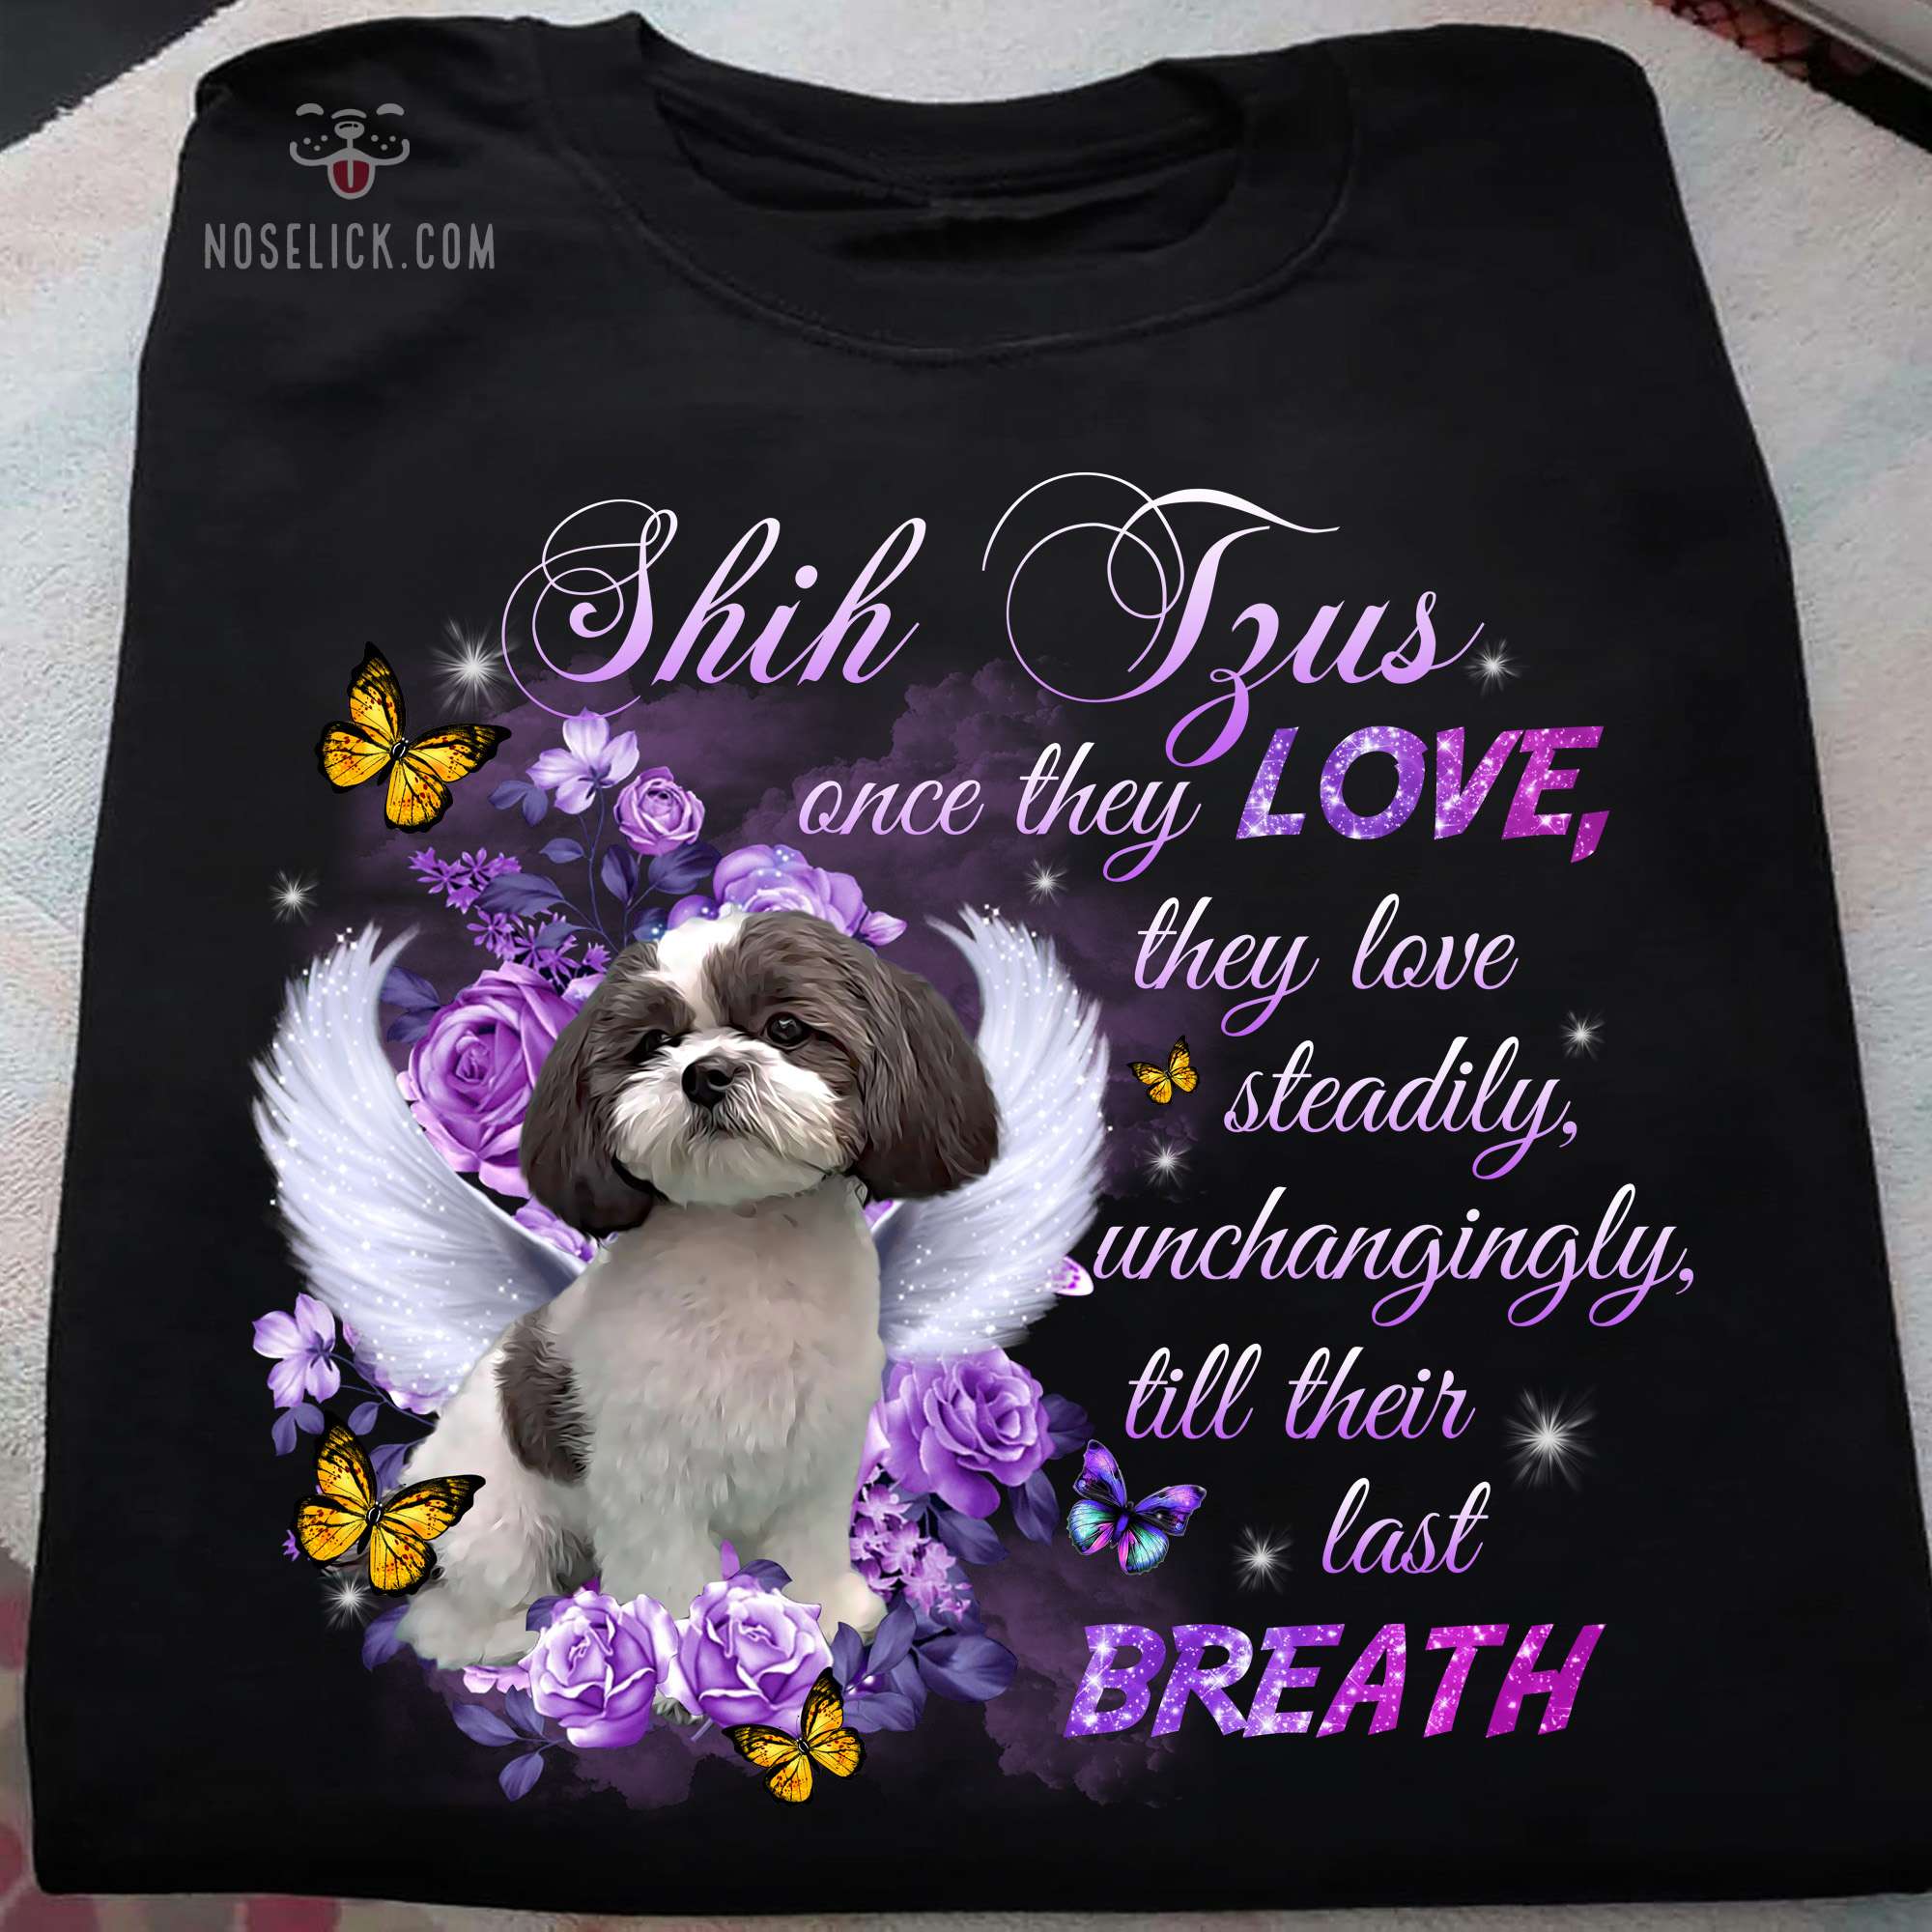 Shih Tzus dog - Once they love, they love steadily, unchangingly till their last breathe